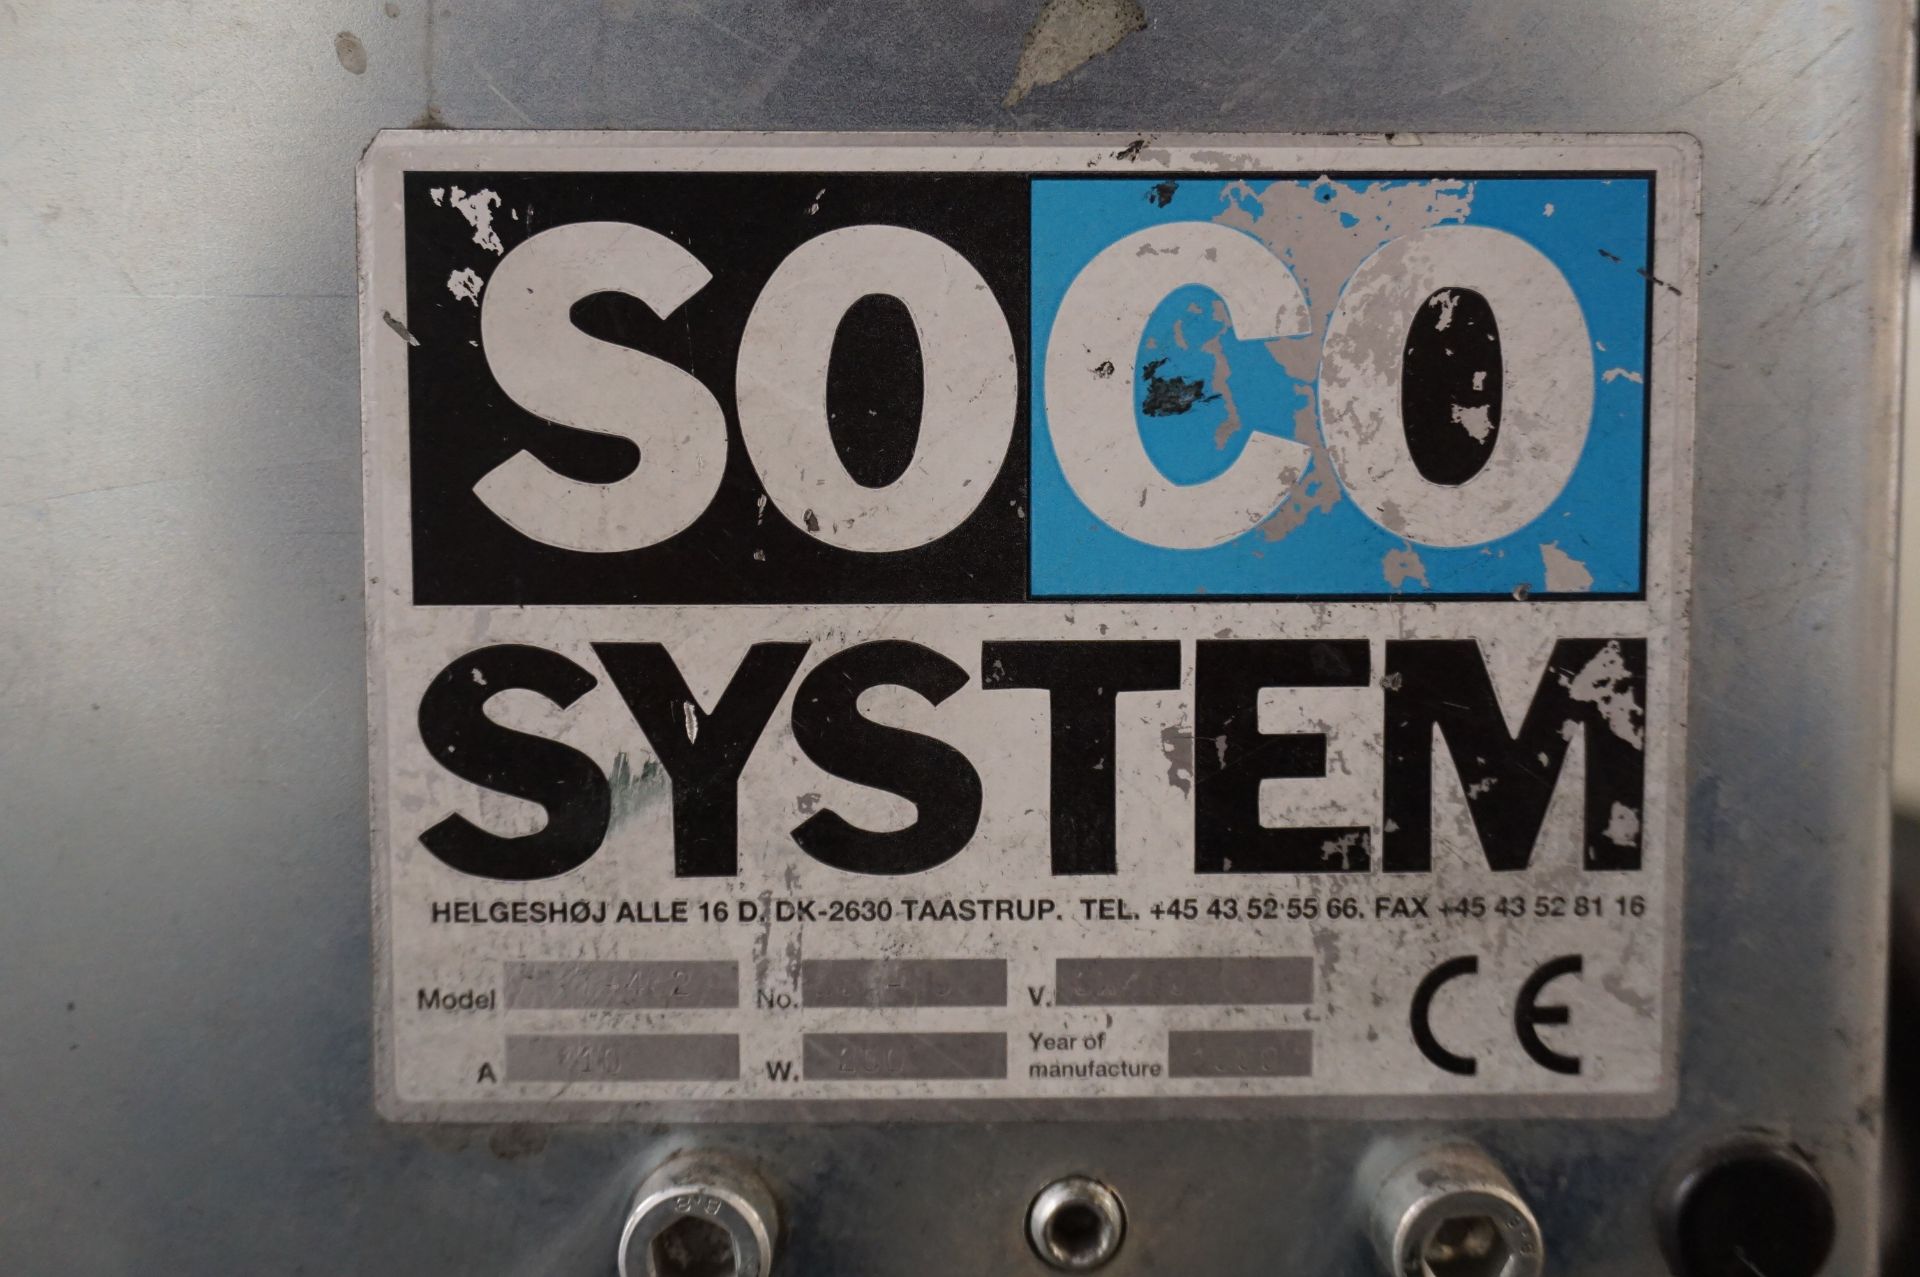 Soco System, Model: T402 box taping machine, Serial No. N/A (2000) with infeed/outfeed conveyor - Image 4 of 4